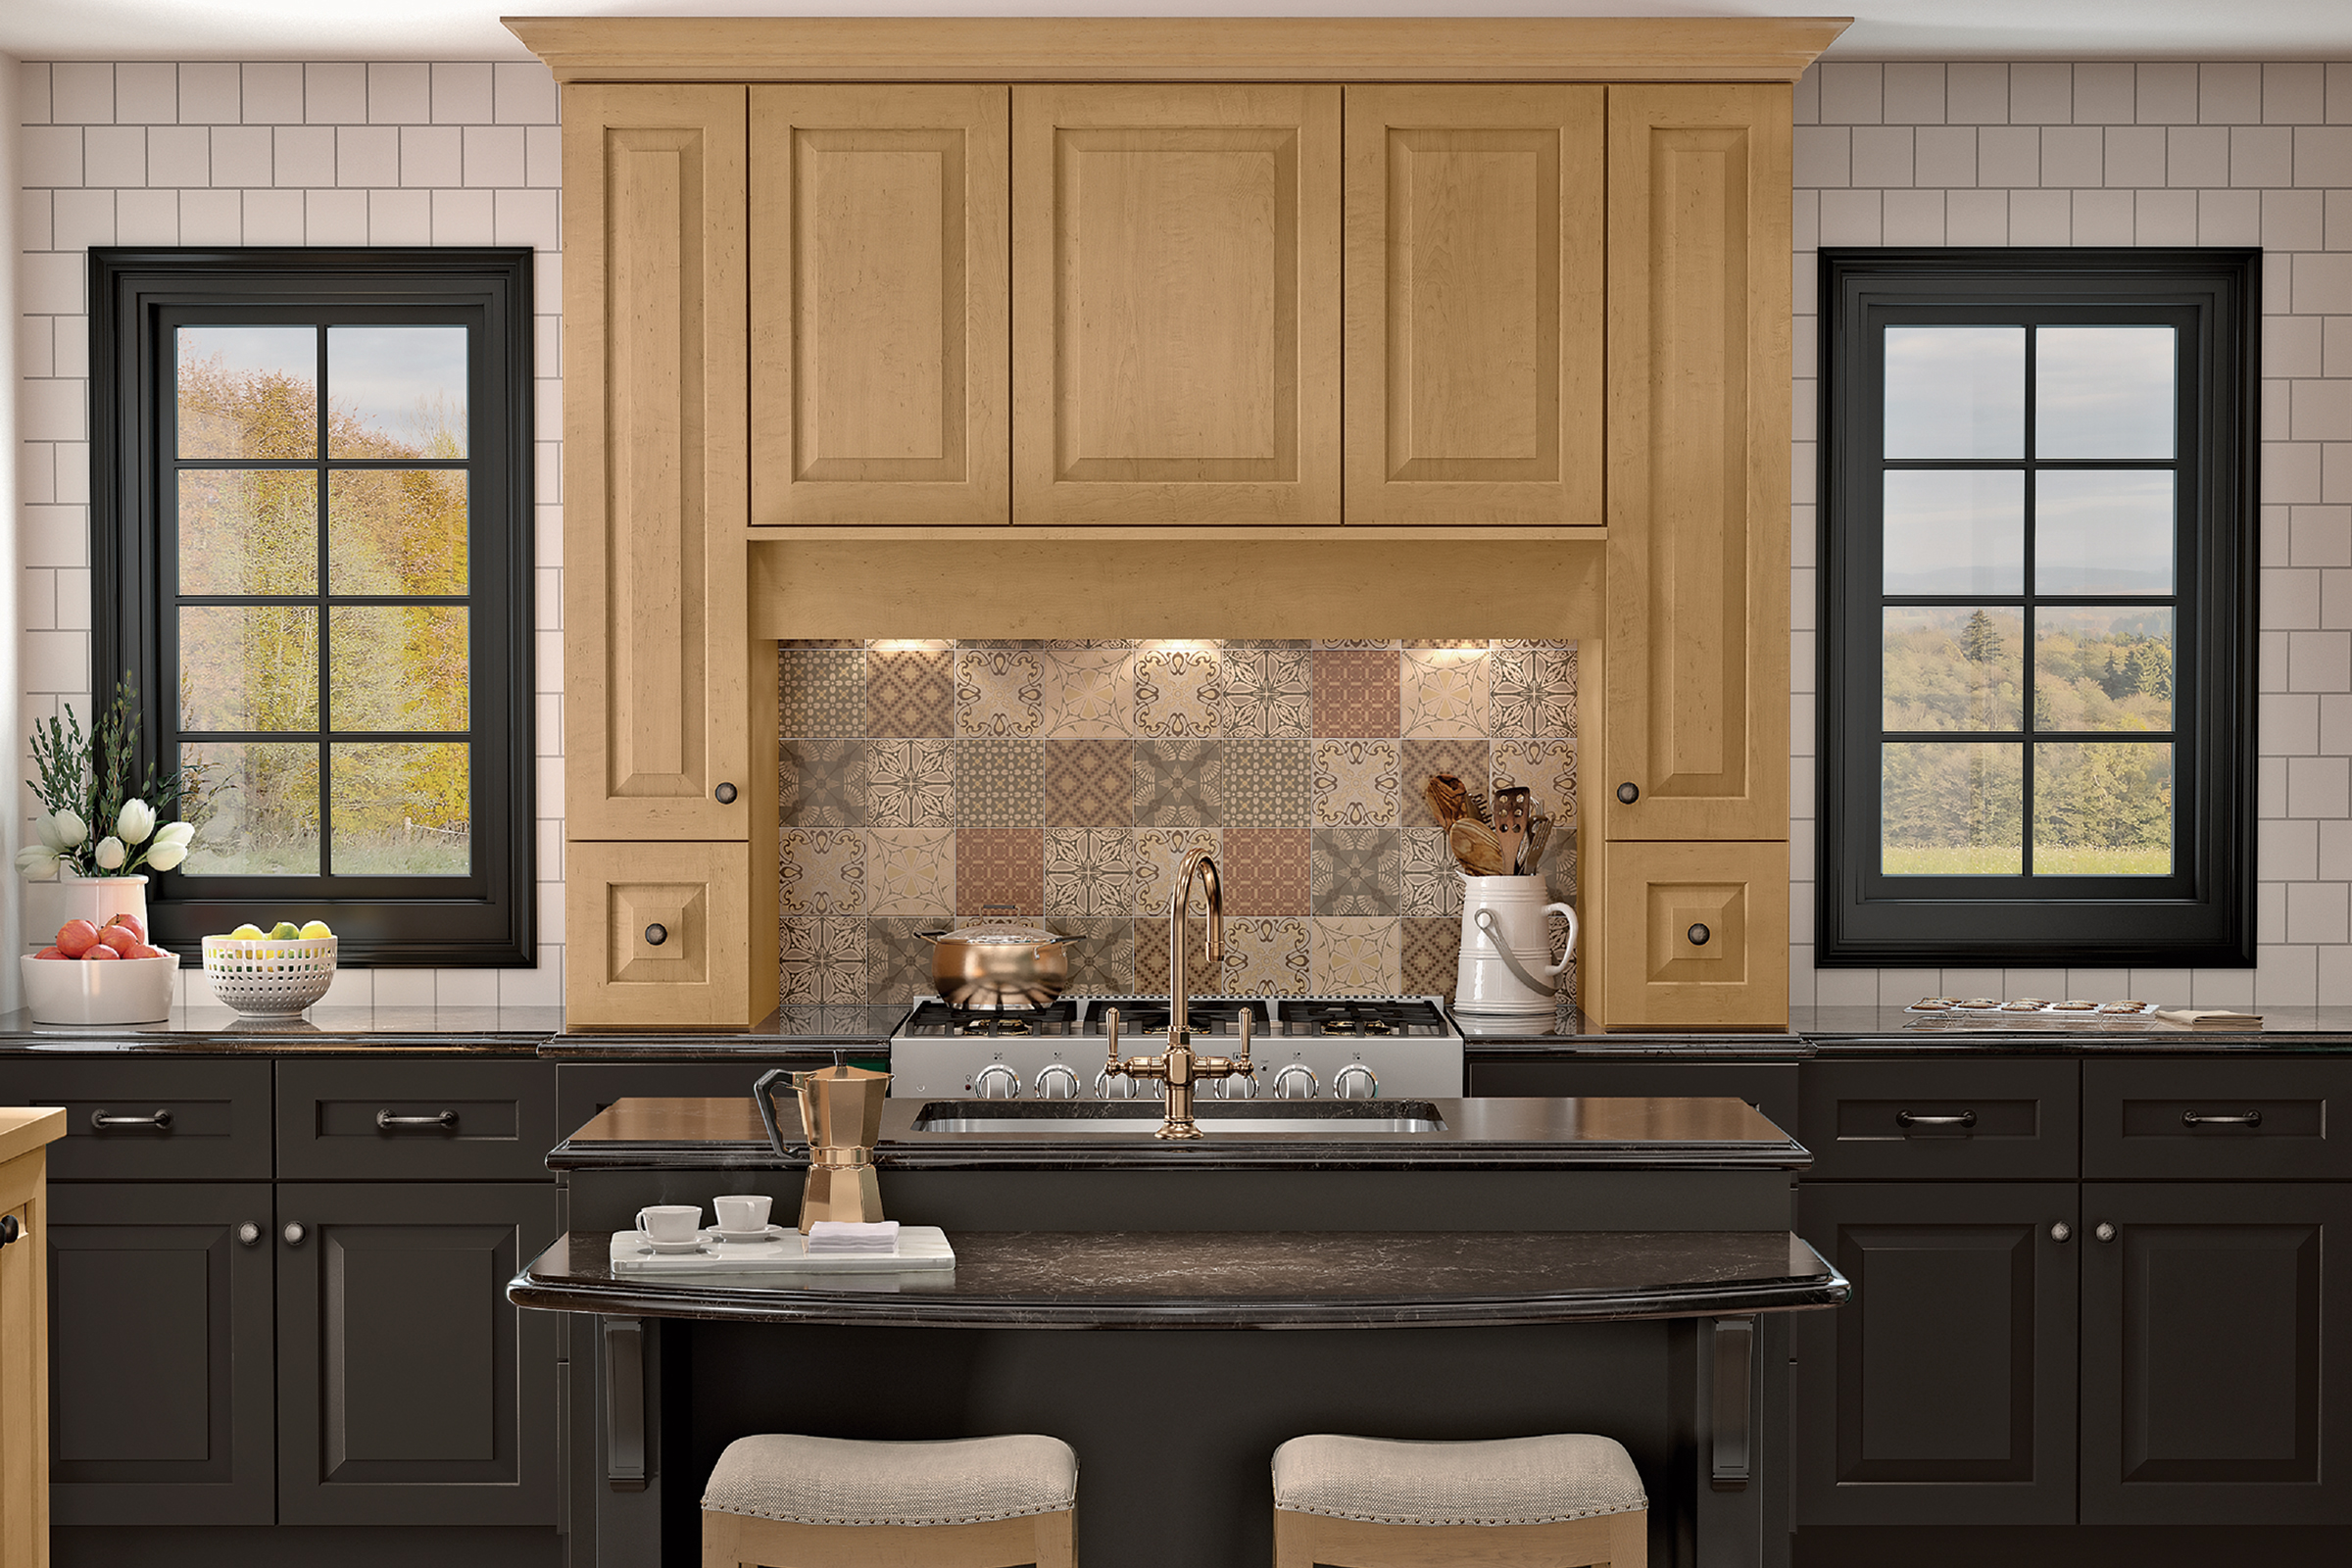 Two-tone KraftMaid kitchen with traditional-style raised panel wood Barley stain cabinets surrounding range